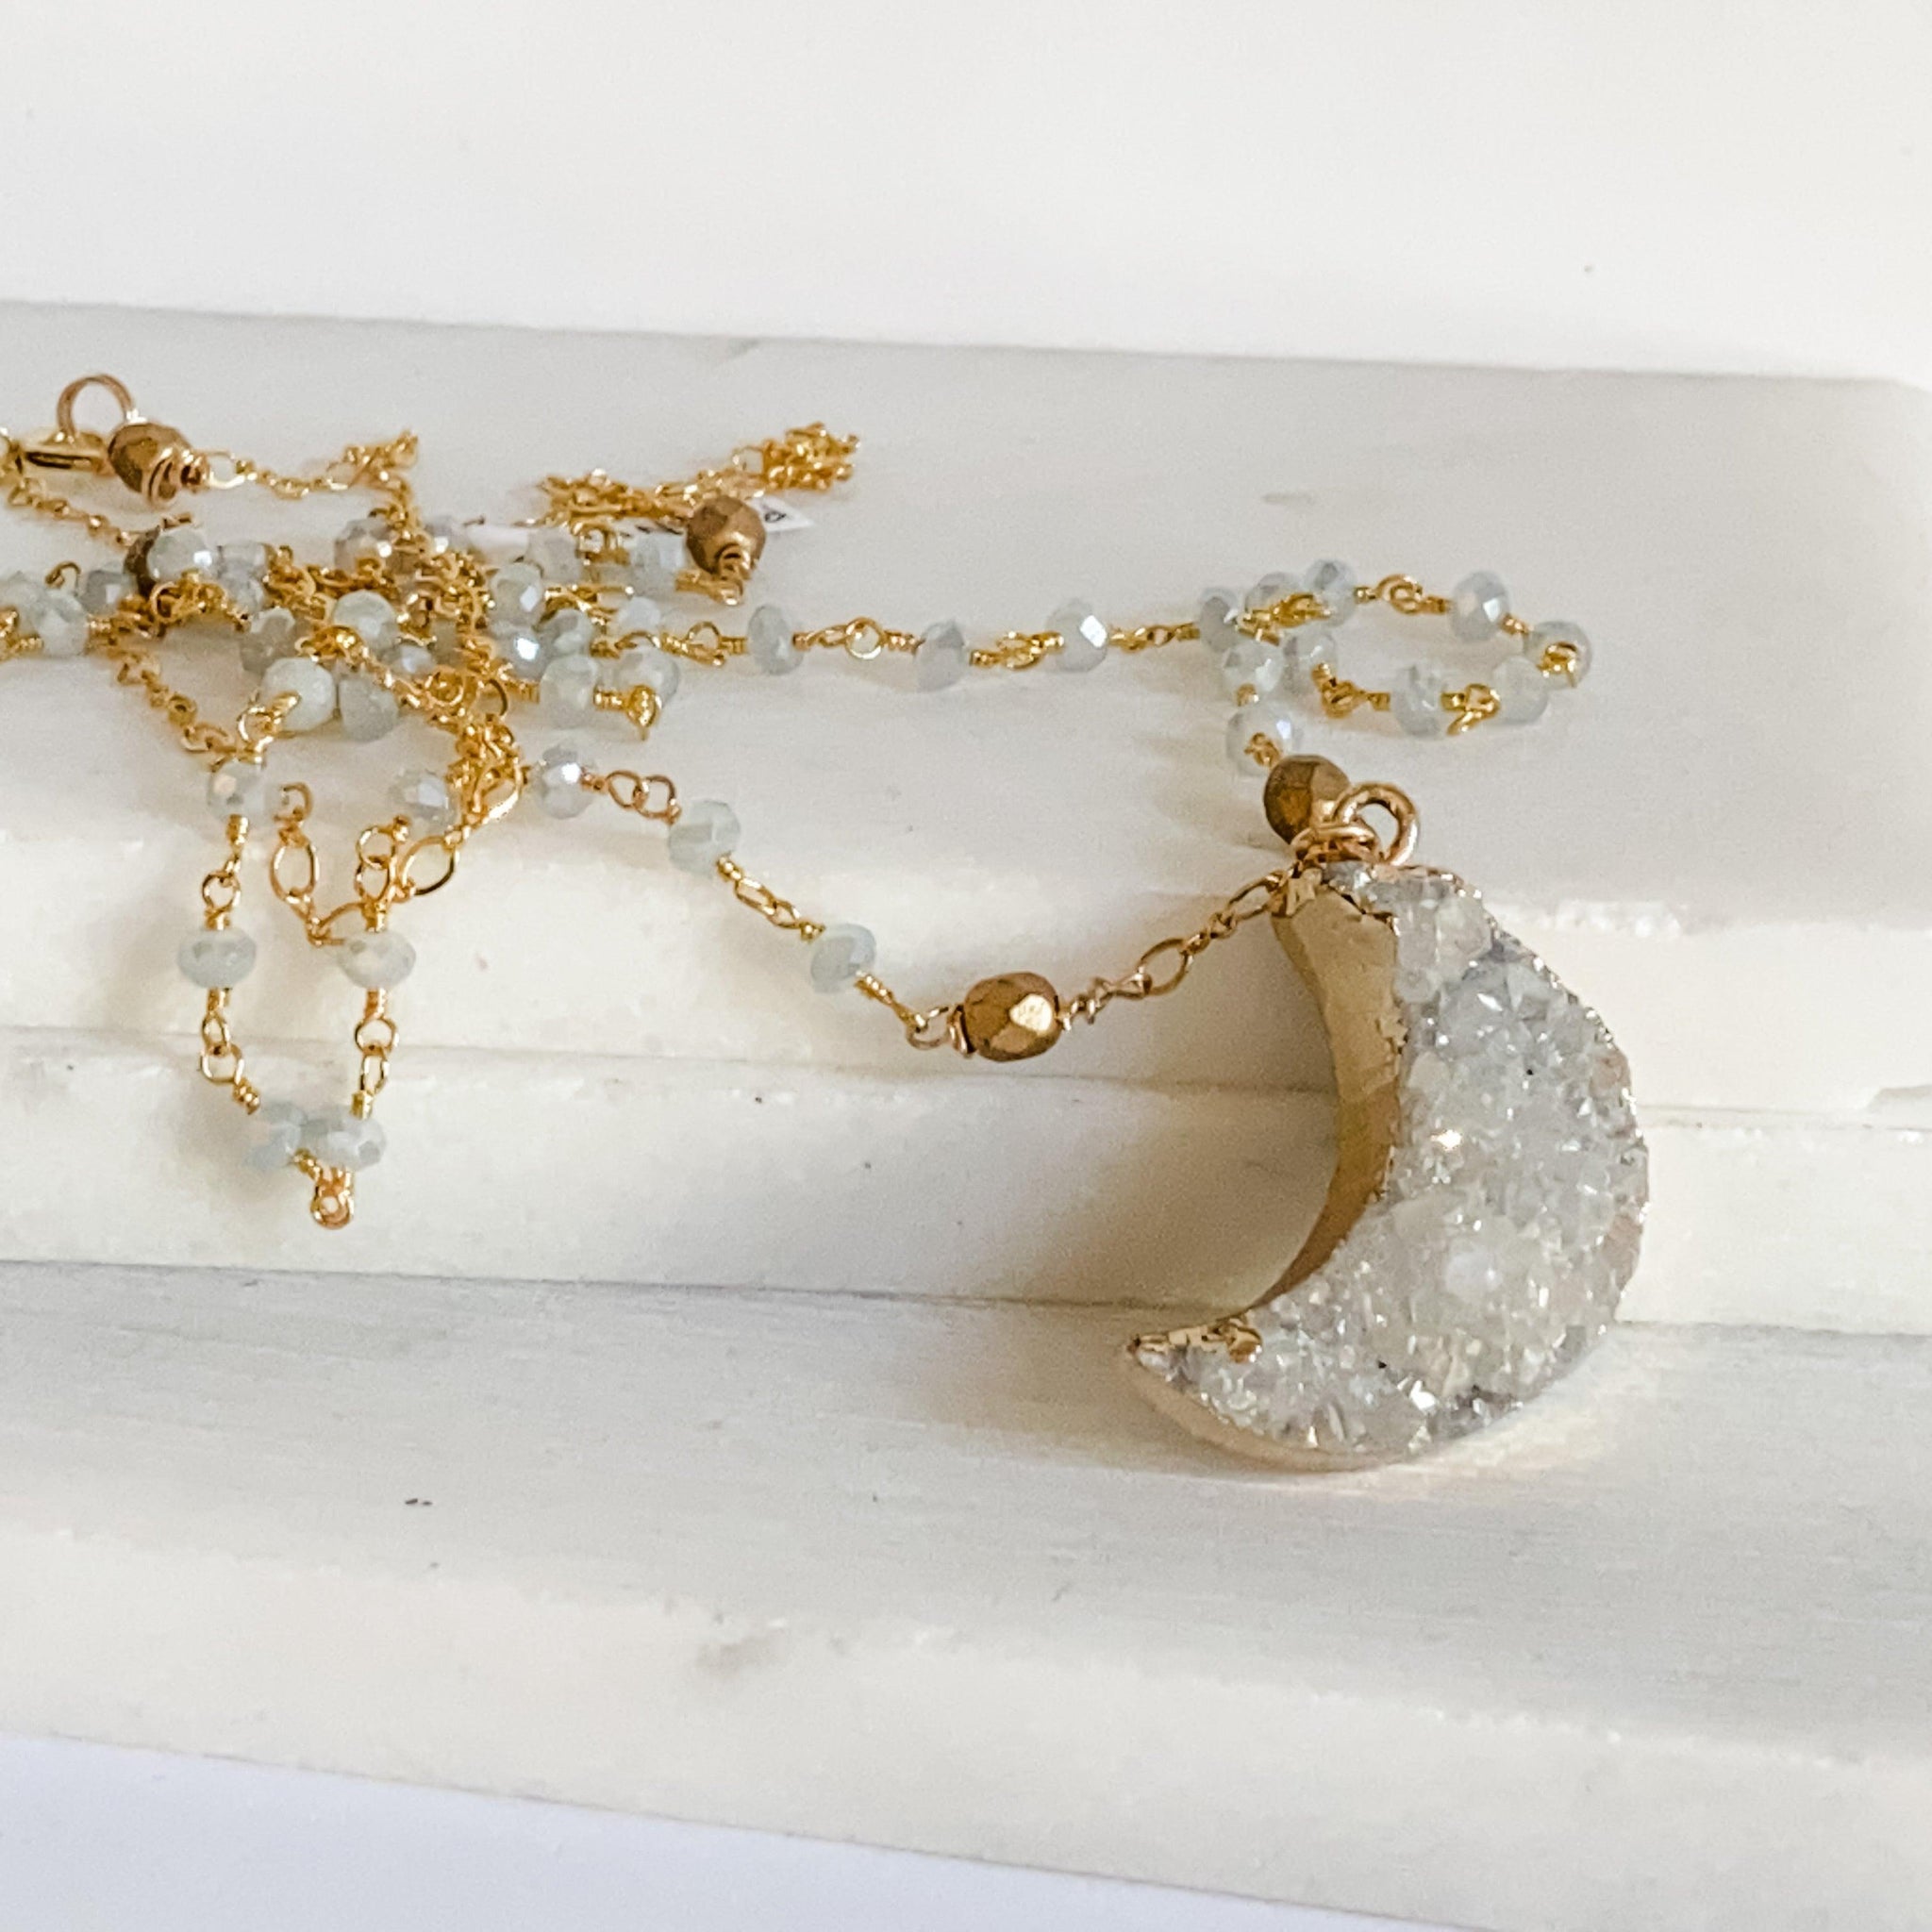 Druzy Quartz Natural Moon, Gray Jade and Brass with 14K Gold Filled Necklace Uni-T Necklace